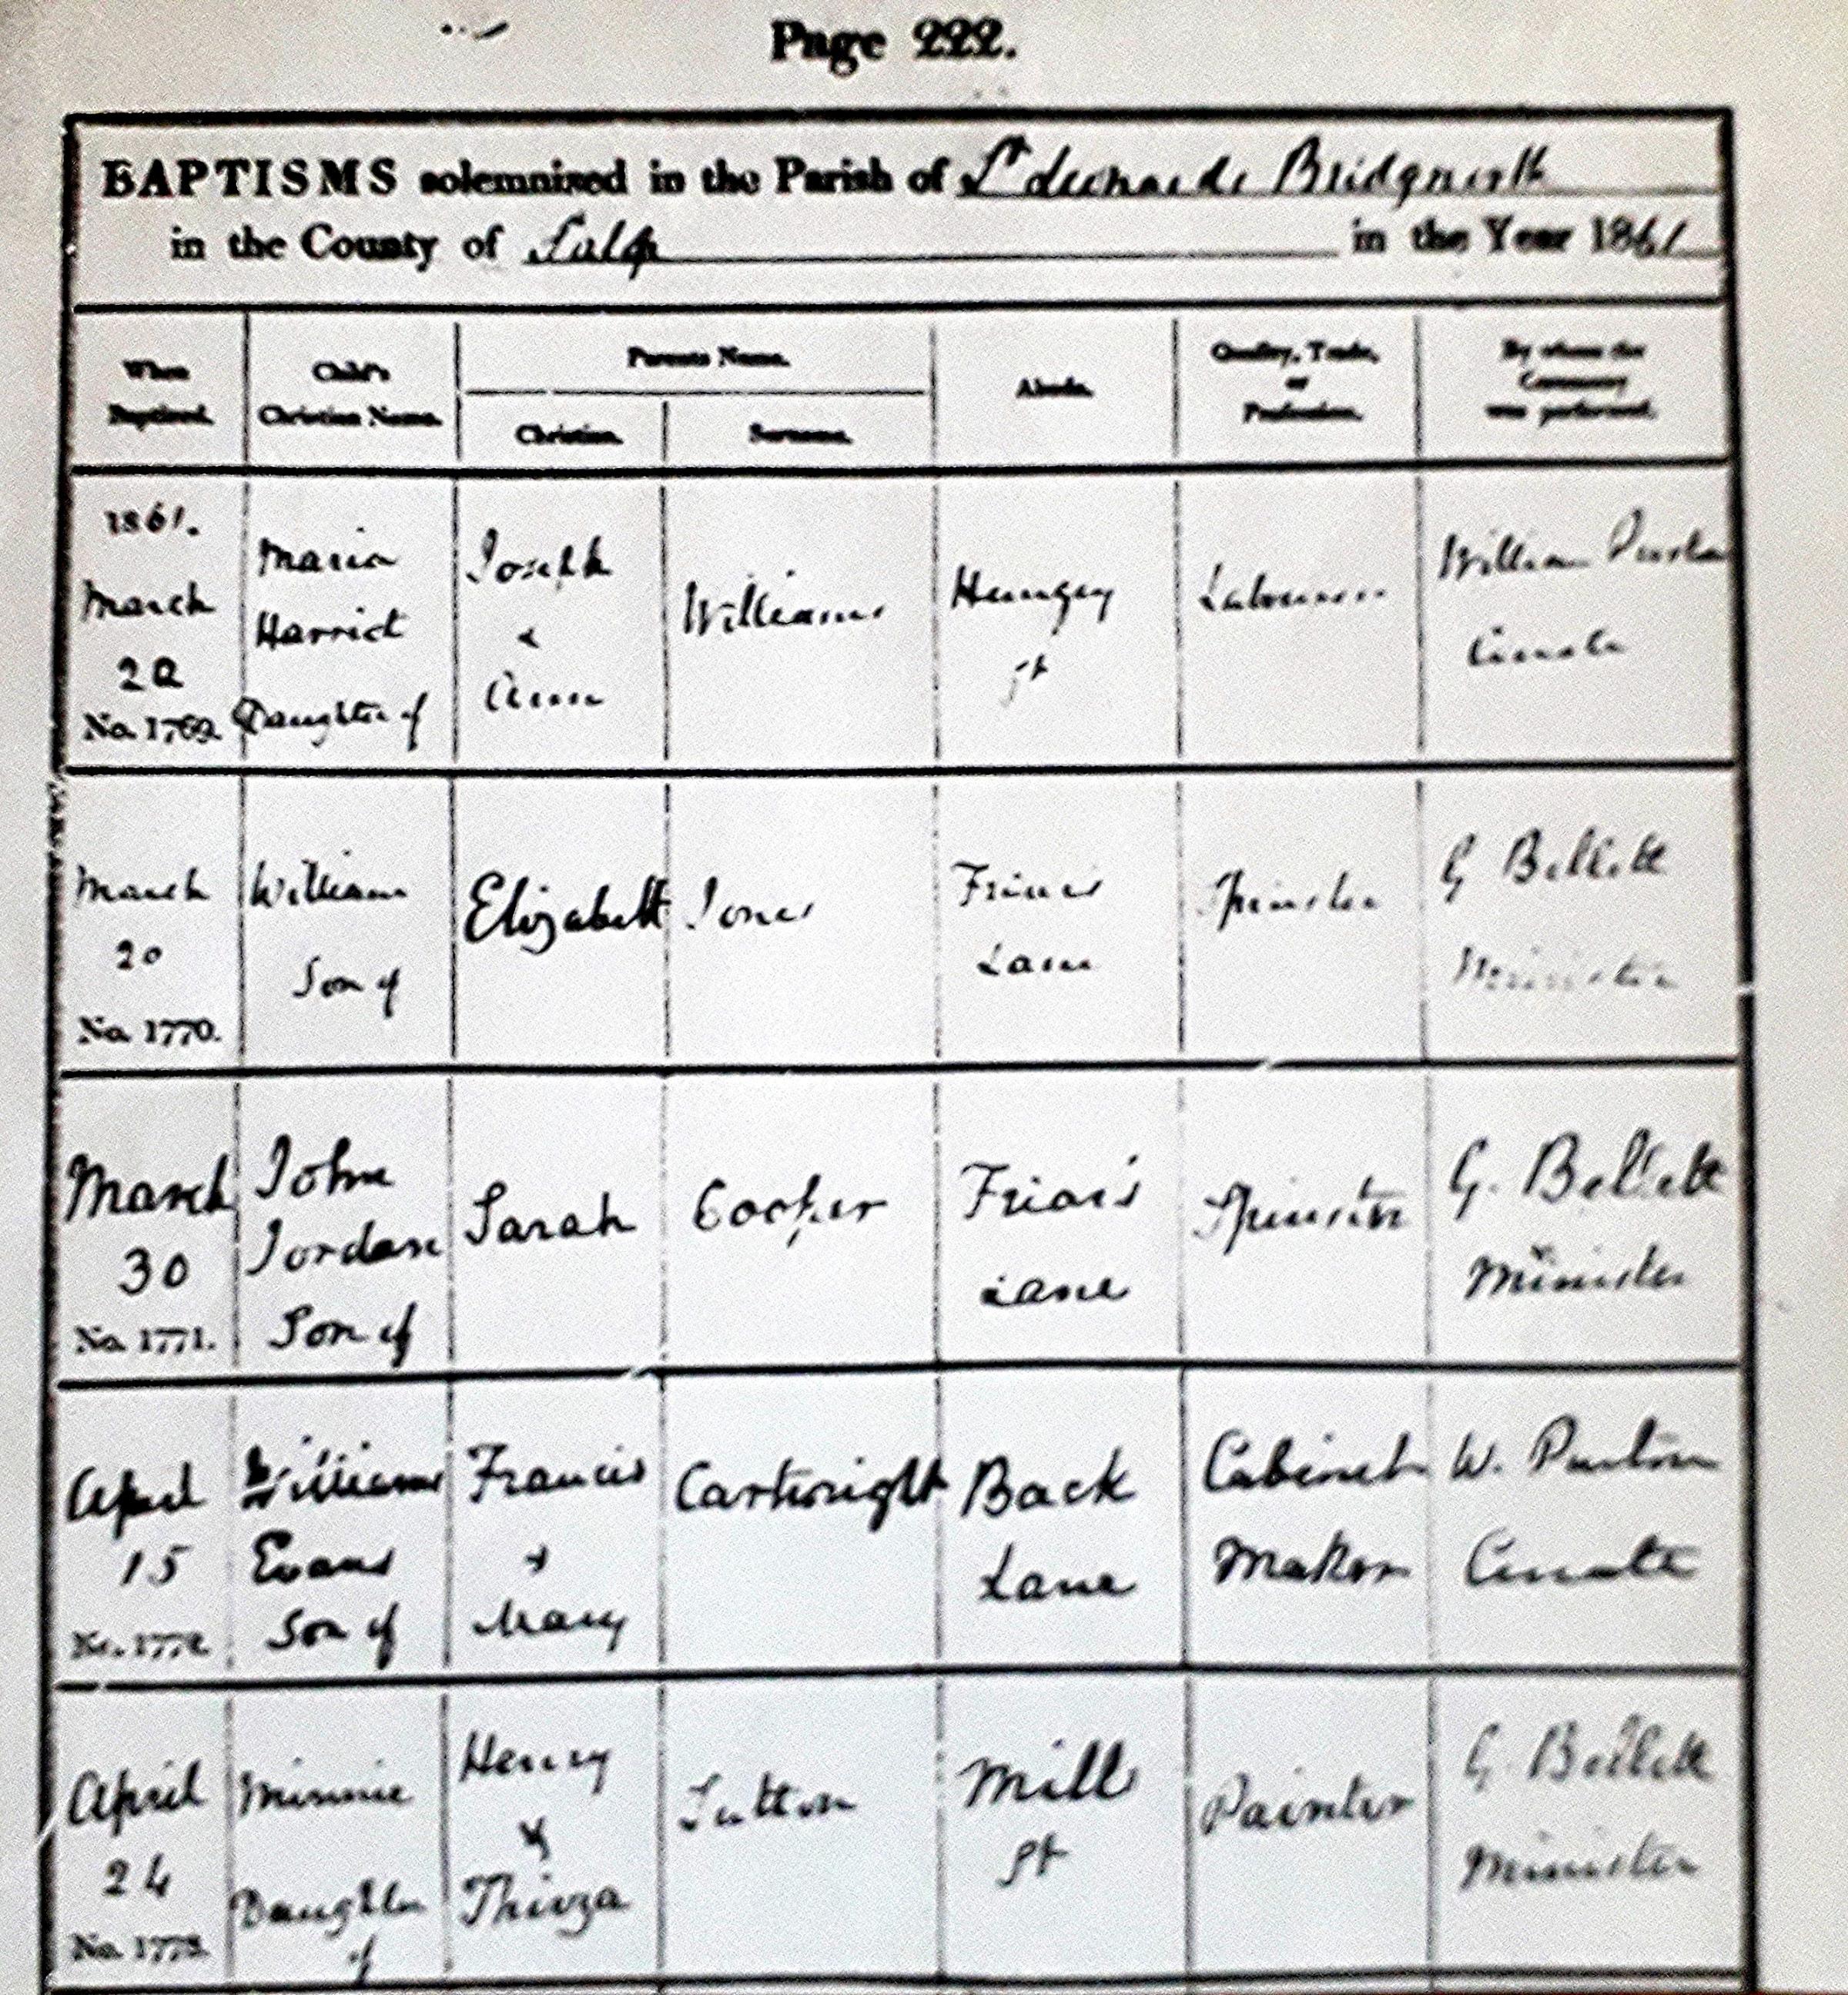 Baptism entries in 1861 for St. Leonards in Bridgnorth. At the bottom is Chris Suttons ancestor Minnie, daughter of Henry and Thirza Sutton